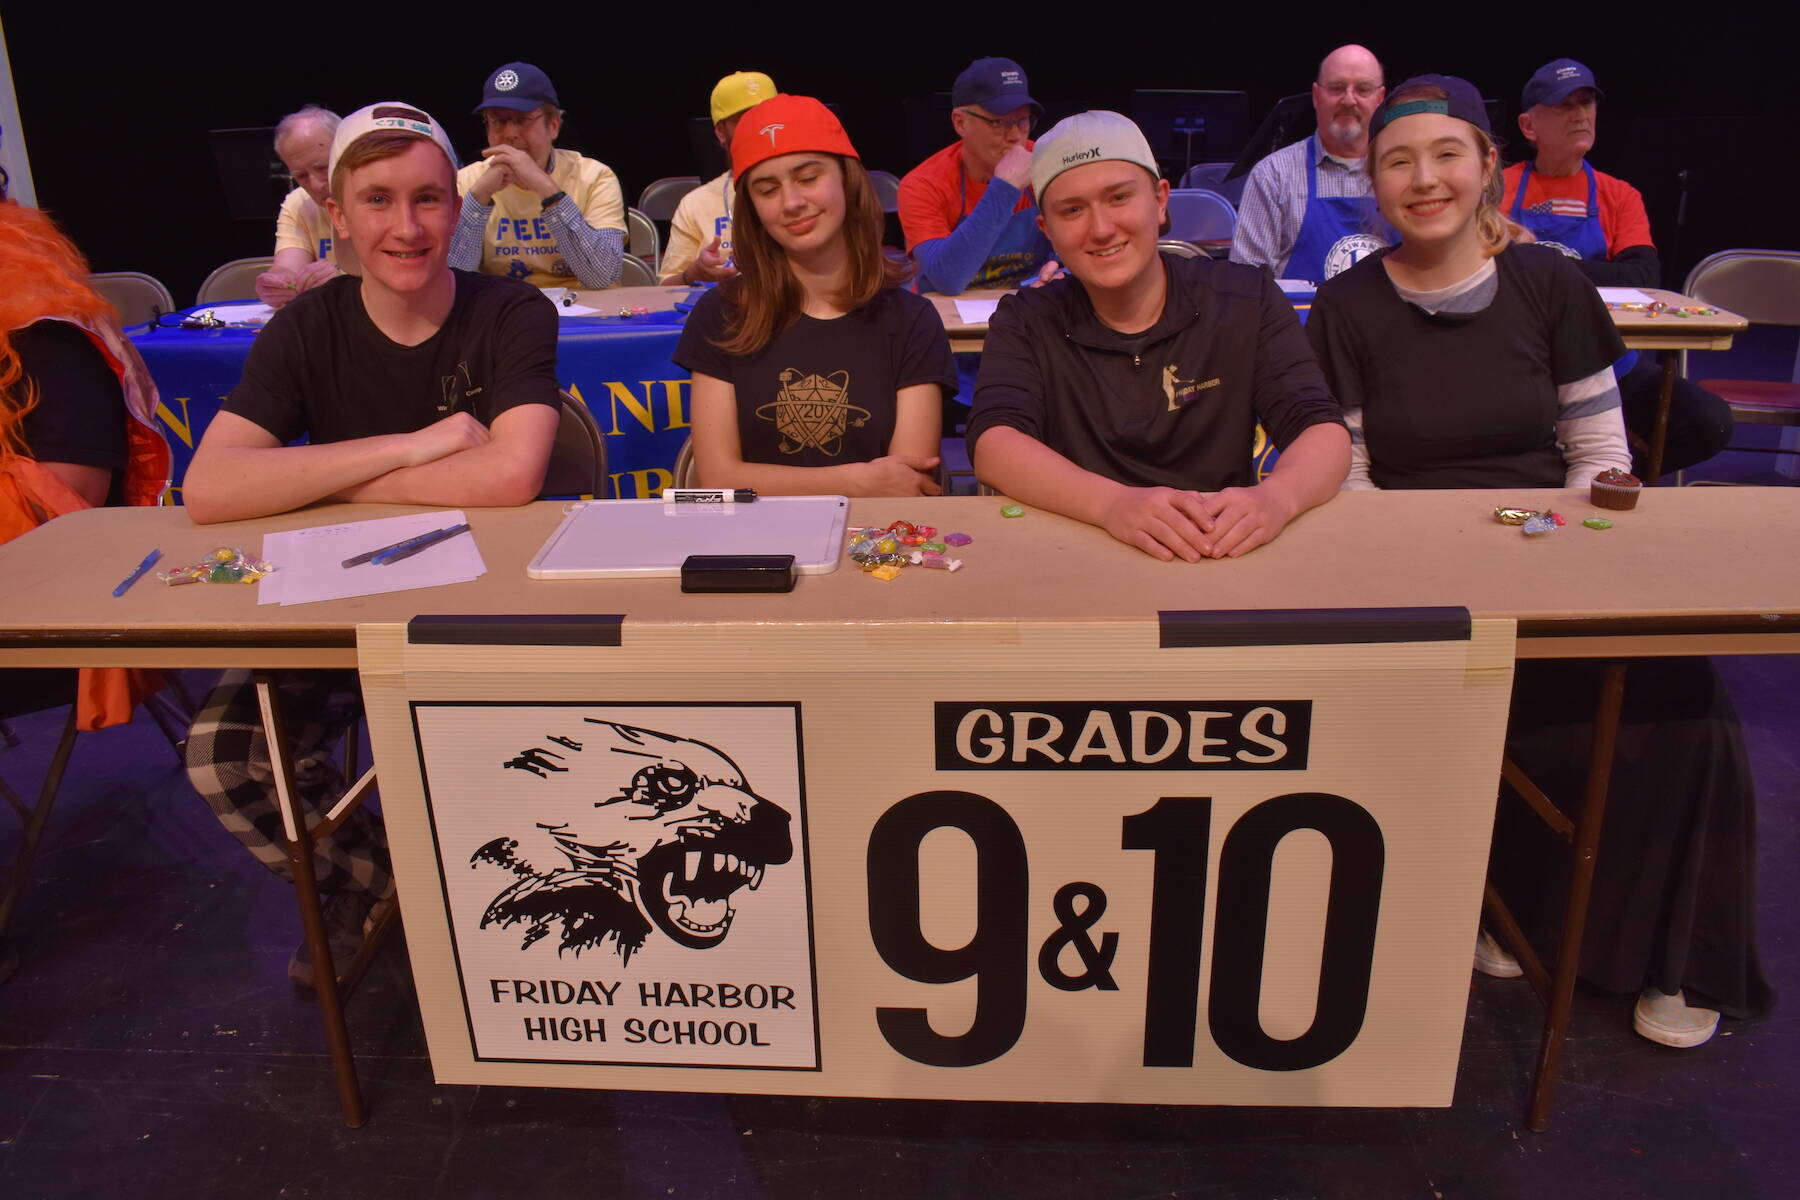 Kelley Balcomb-Bartok \ Staff photo
The FHHS Freshman and Sophomore team members competing in the San Juan Public Schools Foundation’s 28th annual Knowledge Bowl include (l-r) Finn Graham, Flora Vaught, Malachi Cullen, and Kira Clark.